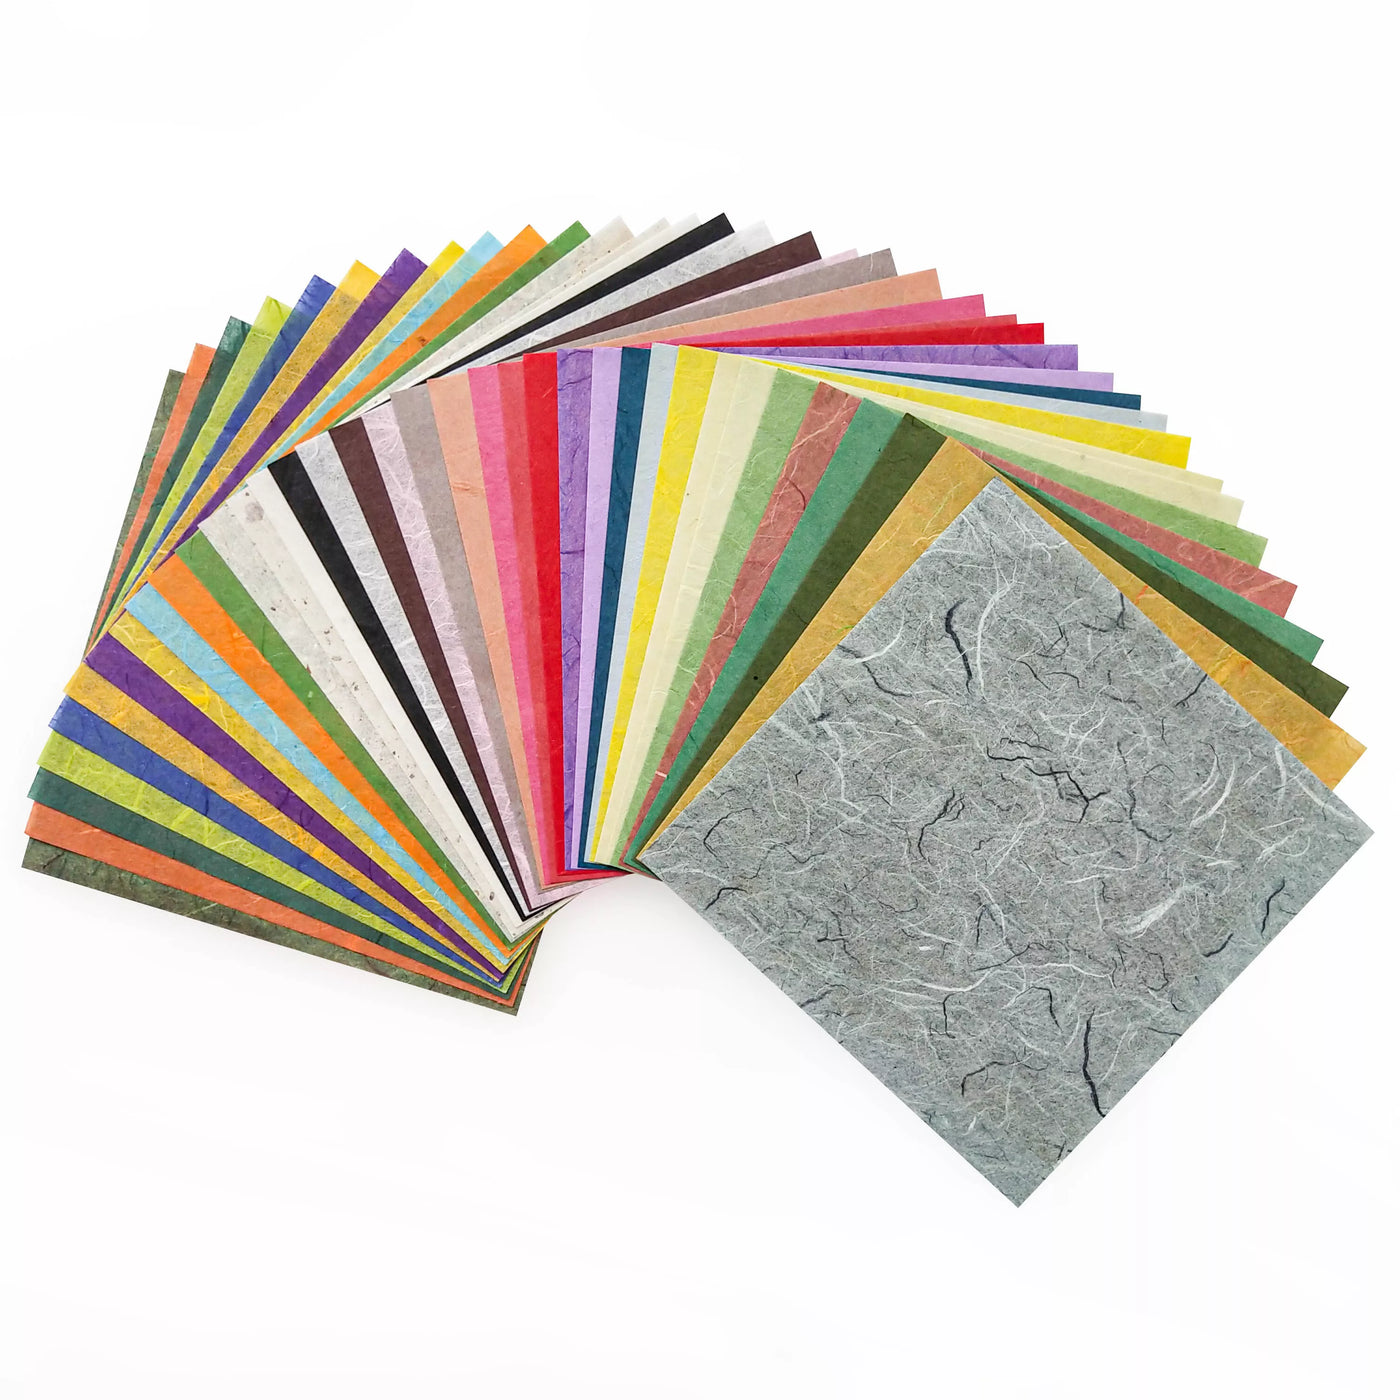 Origami Unryu Kozo Paper Pack (6x6 in., 72 sheets)